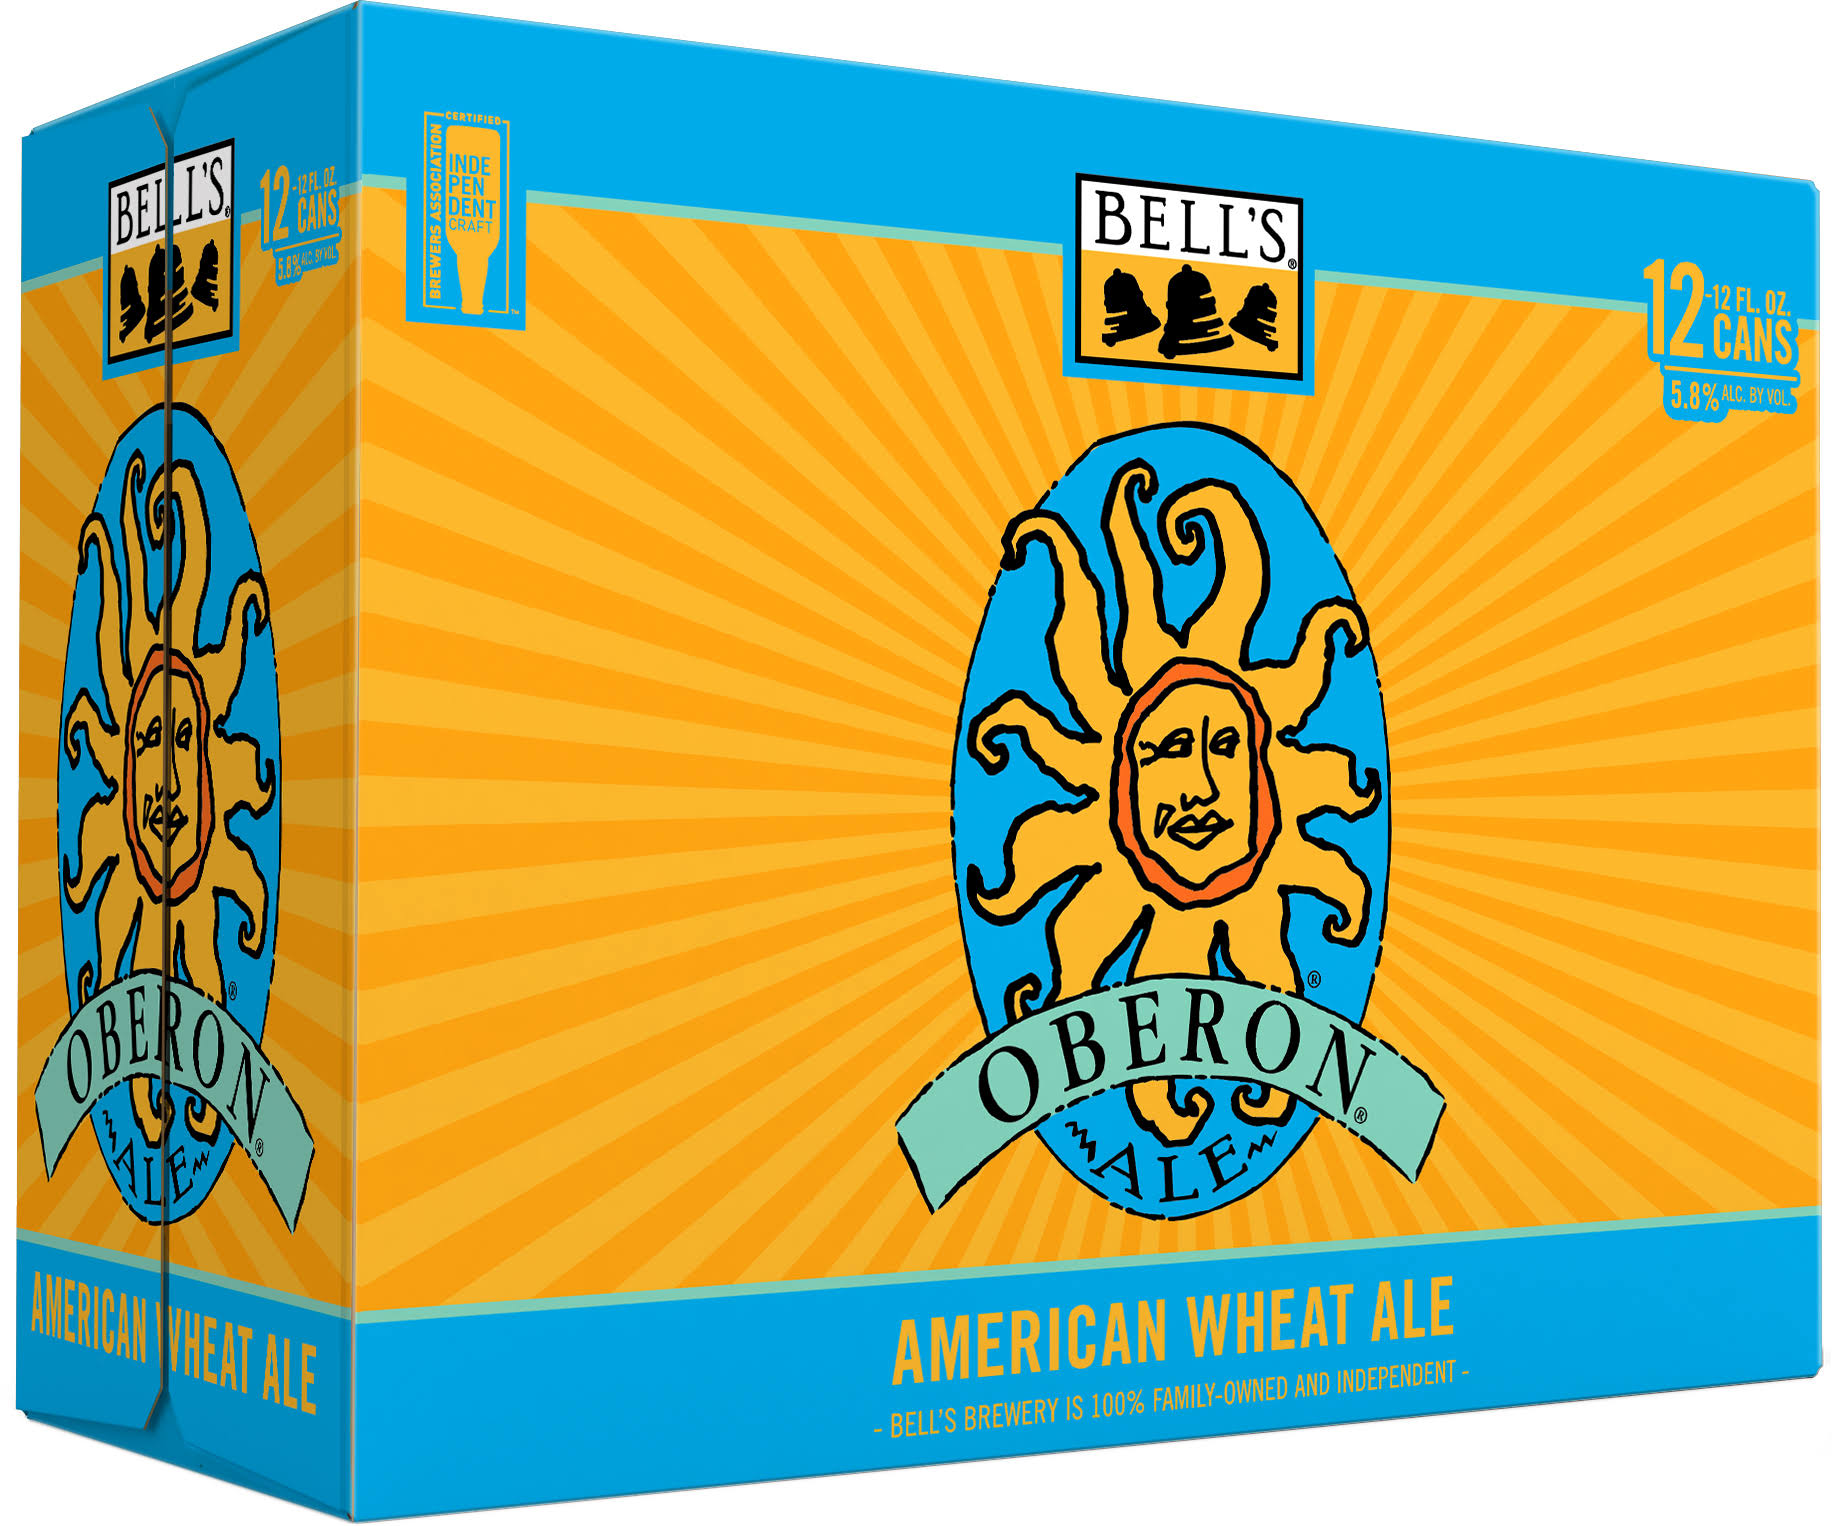 Bell's Beer, Oberon Ale - 12 pack, 12 fl oz cans